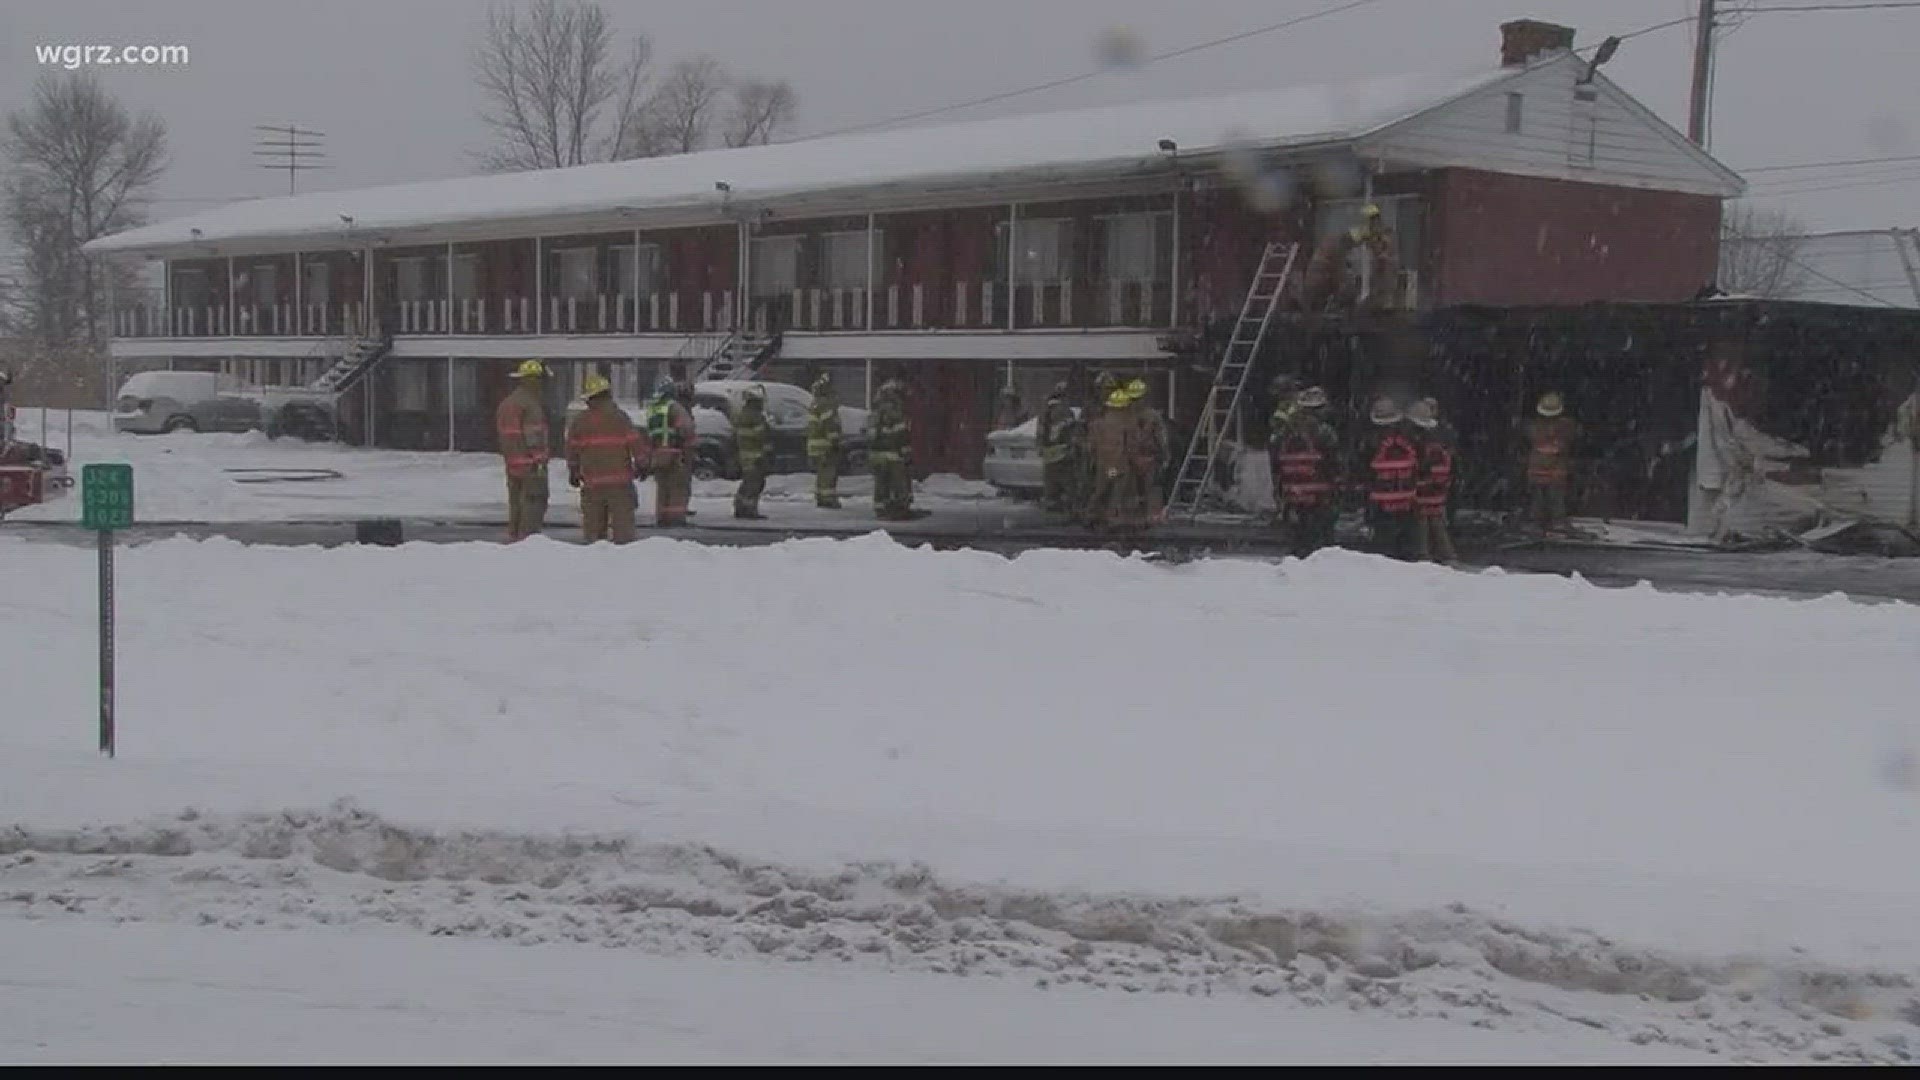 The Red Cross is helping out 8 families Saturday after a motel fire on Grand Island.